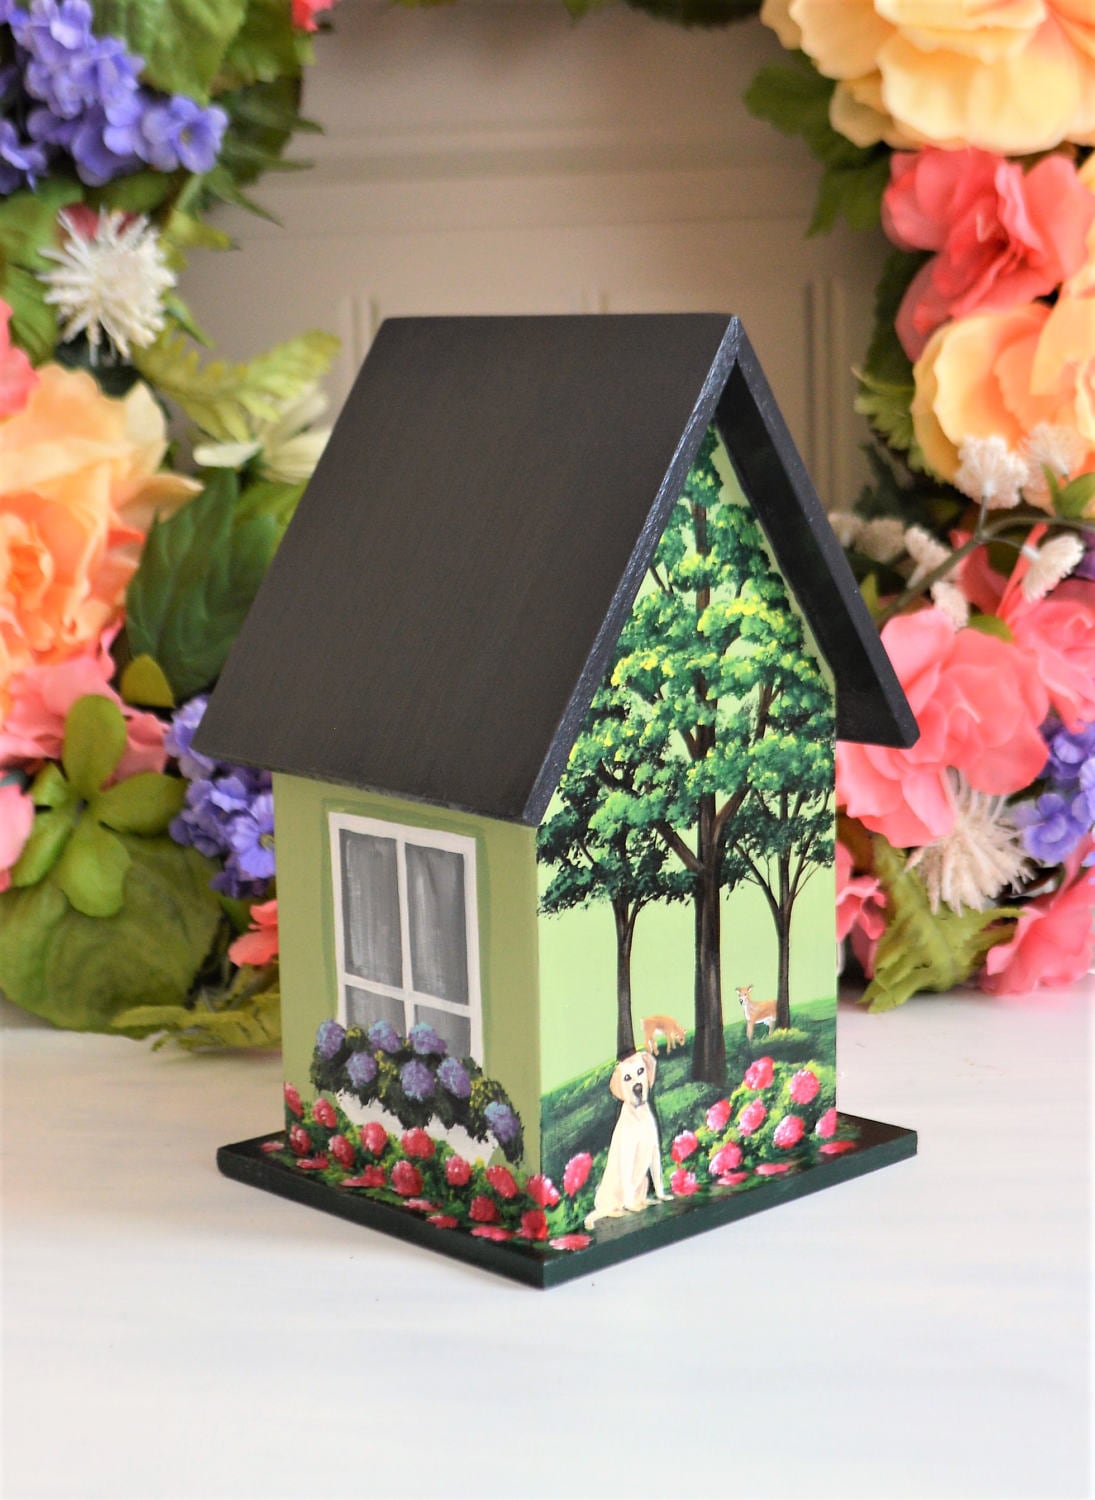 Decorative Hand Painted Birdhouse To Match Real Home